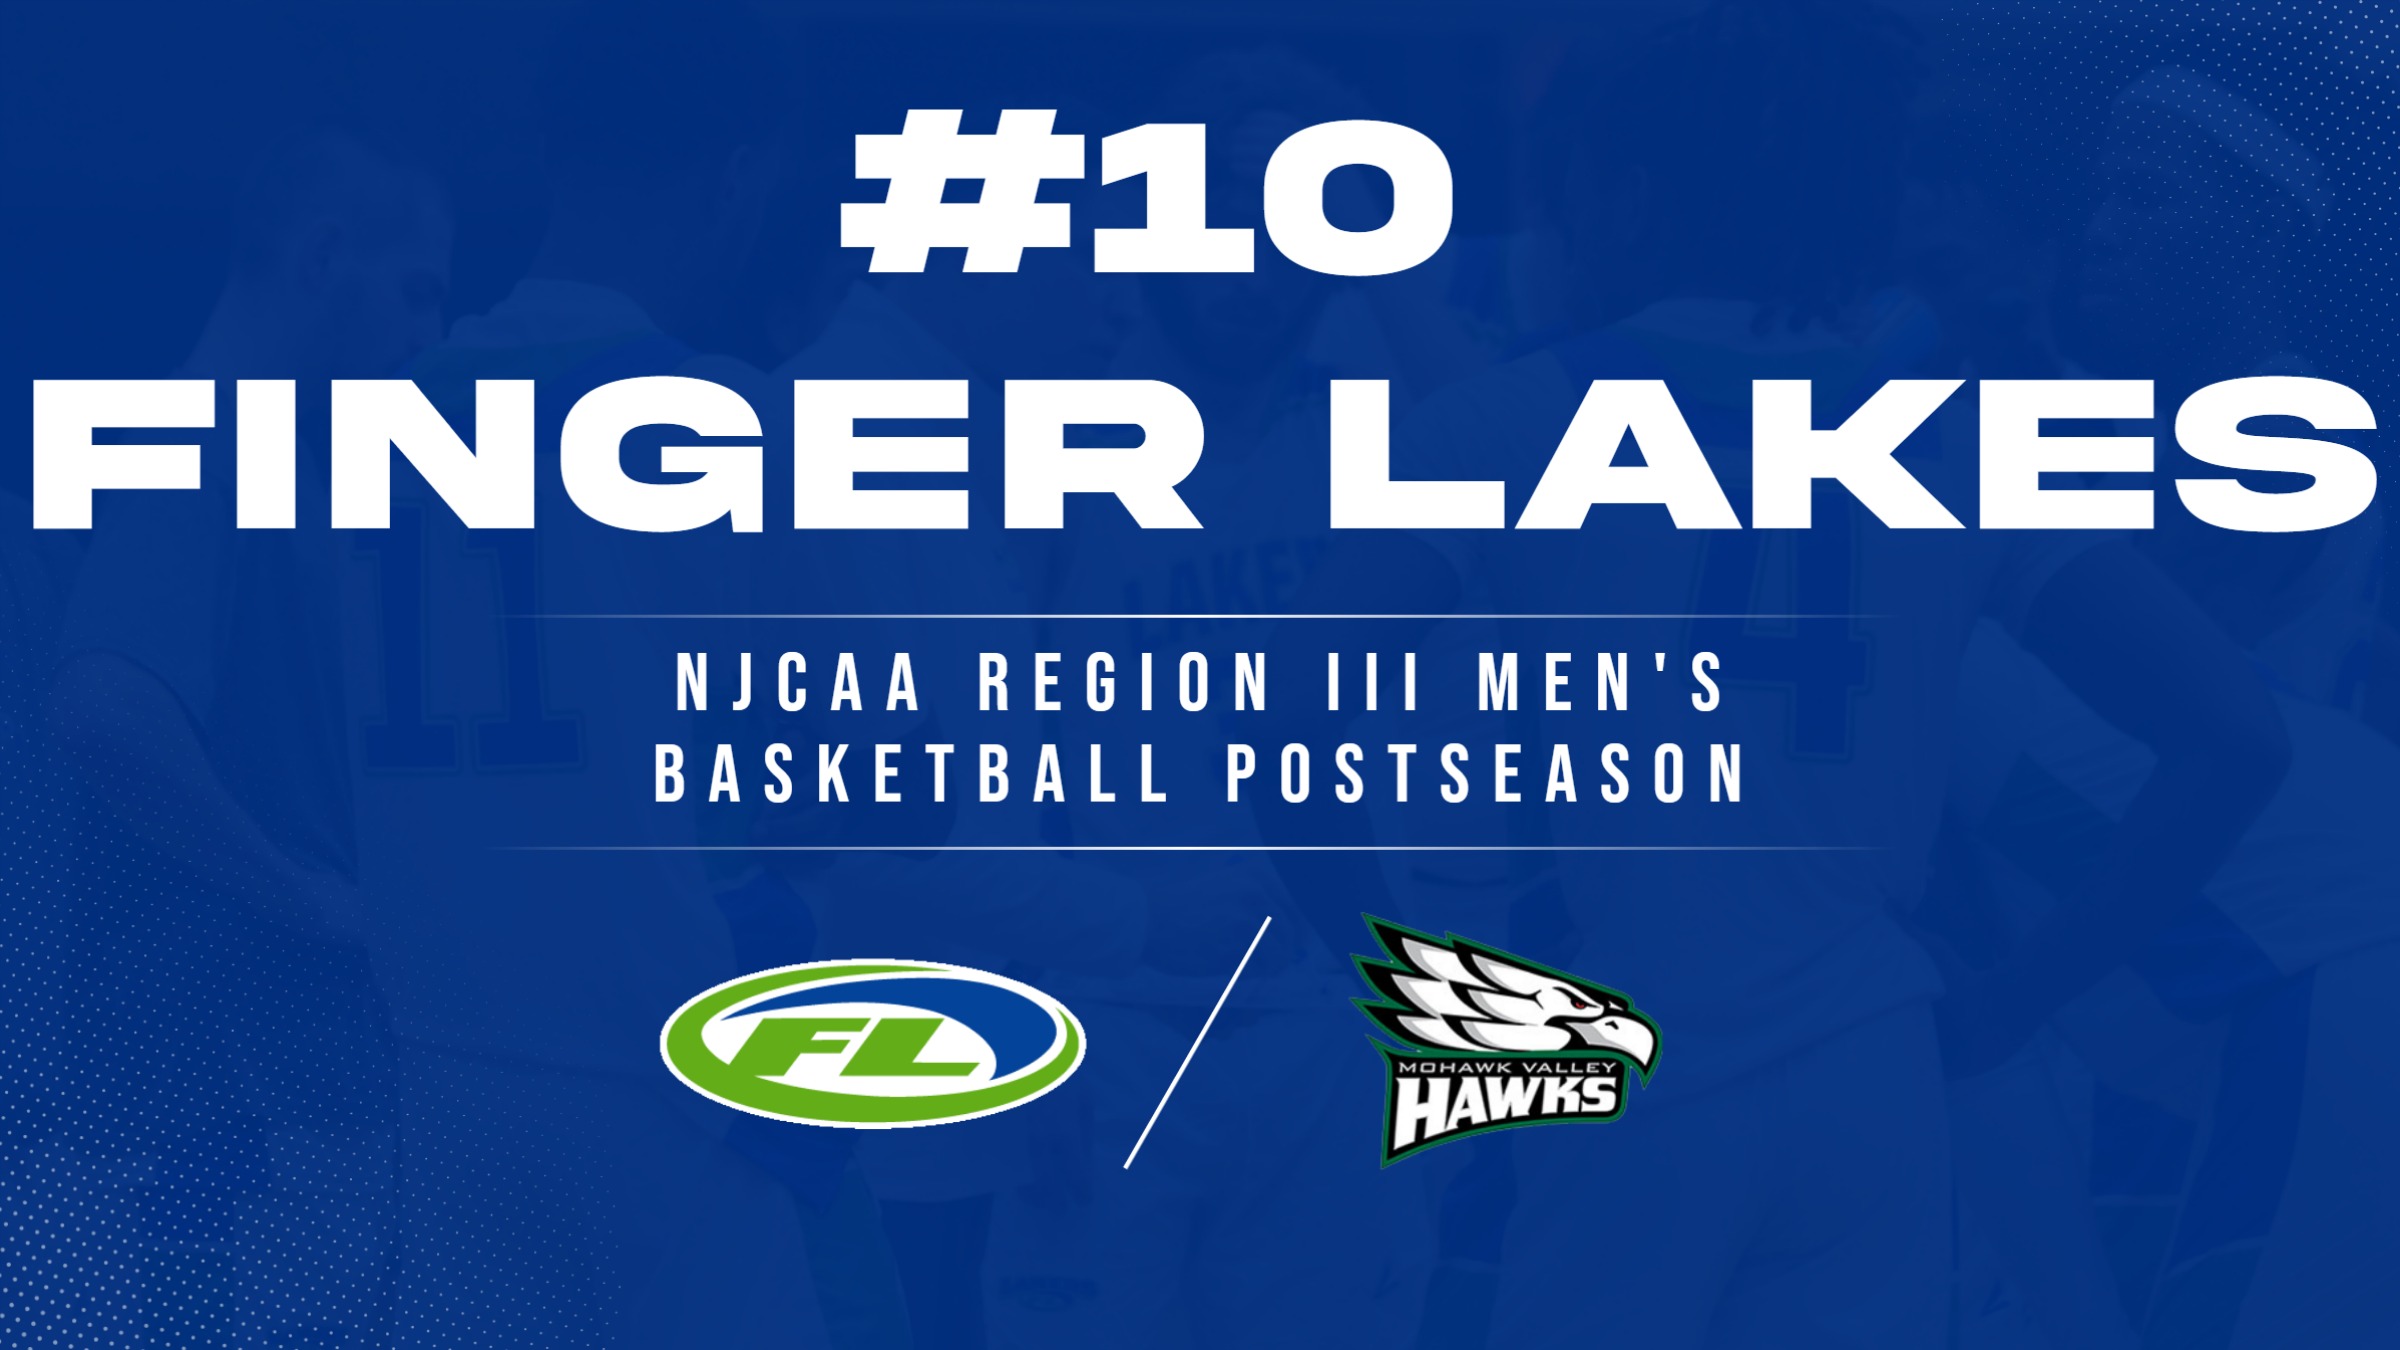 Men's Basketball Draws #10 Seed in Regionals